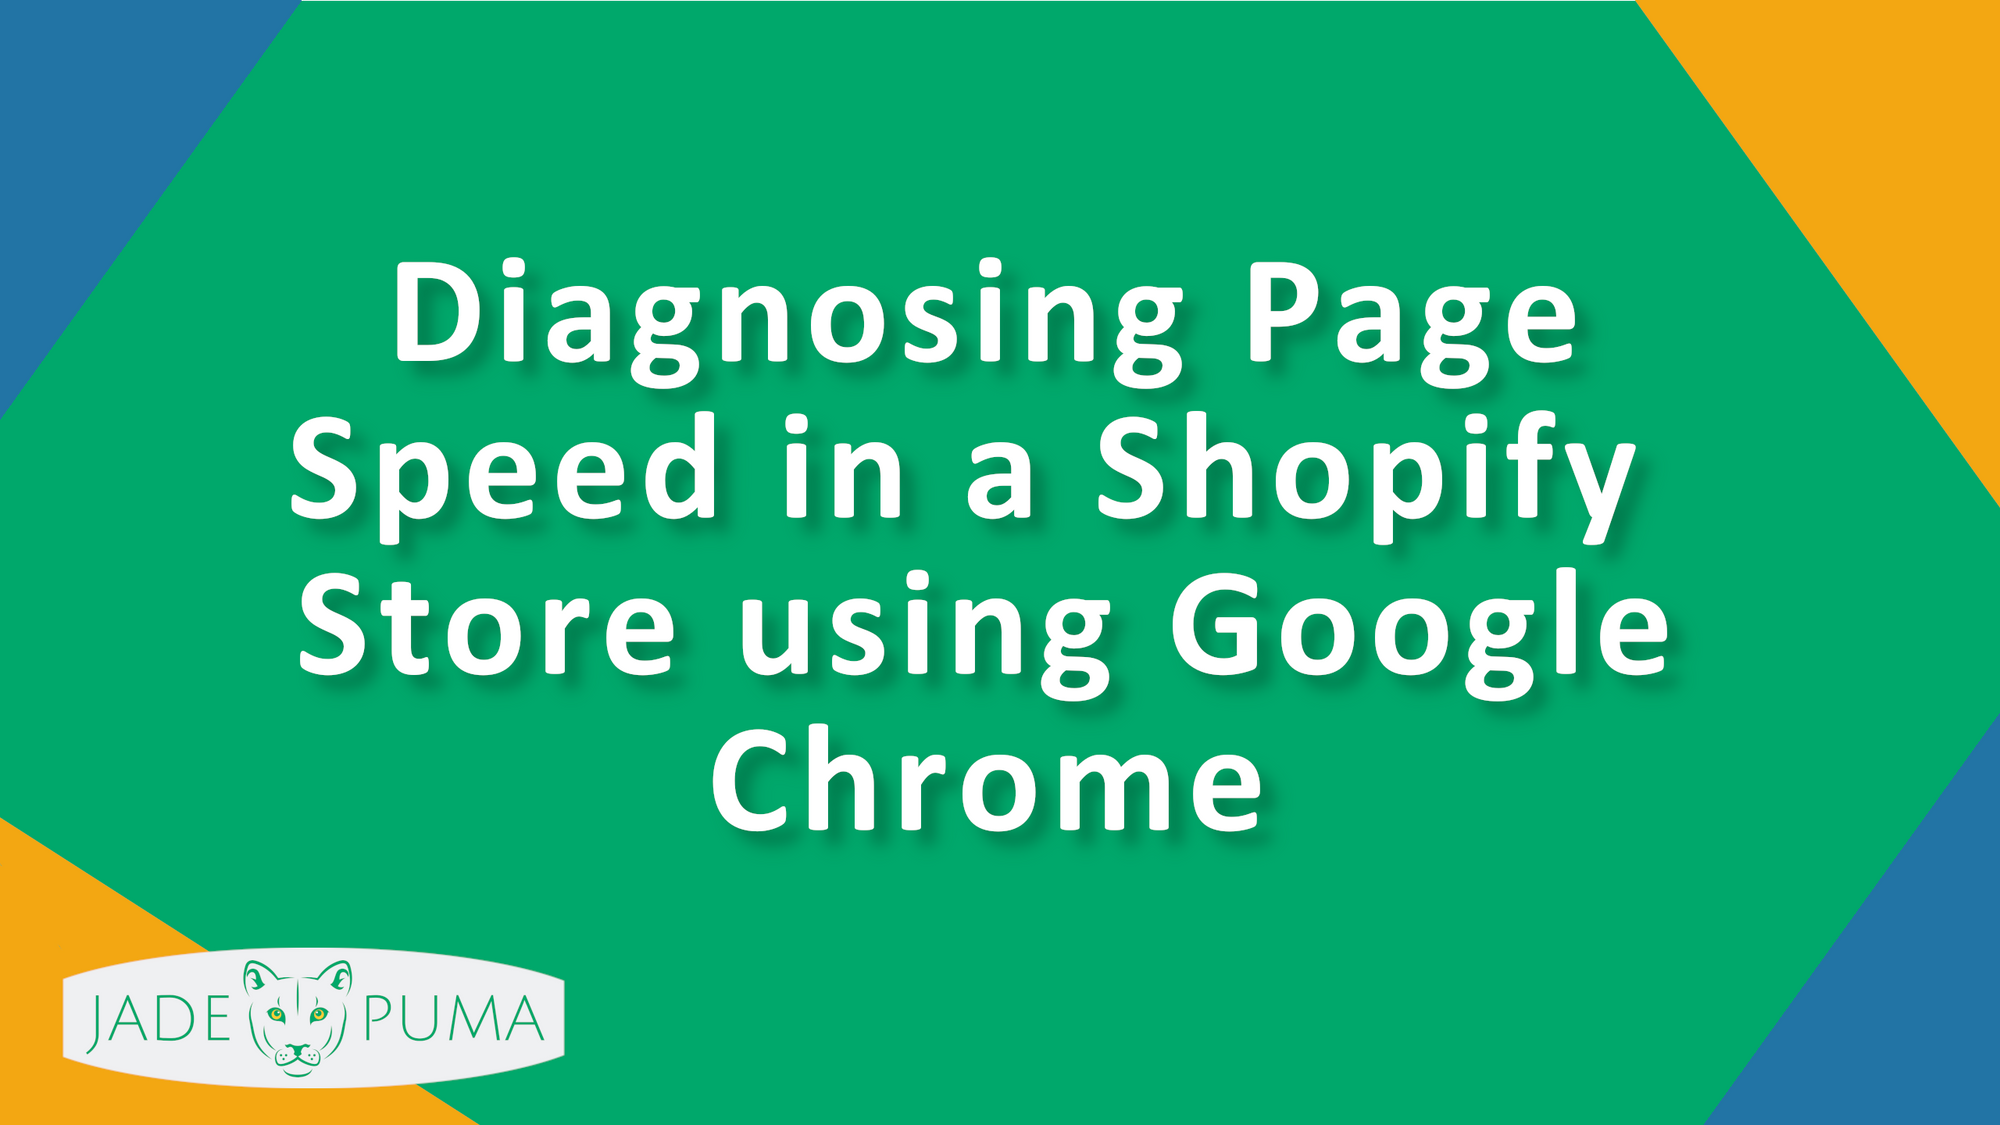 Diagnosing Shopify Page Speed with Google Chrome